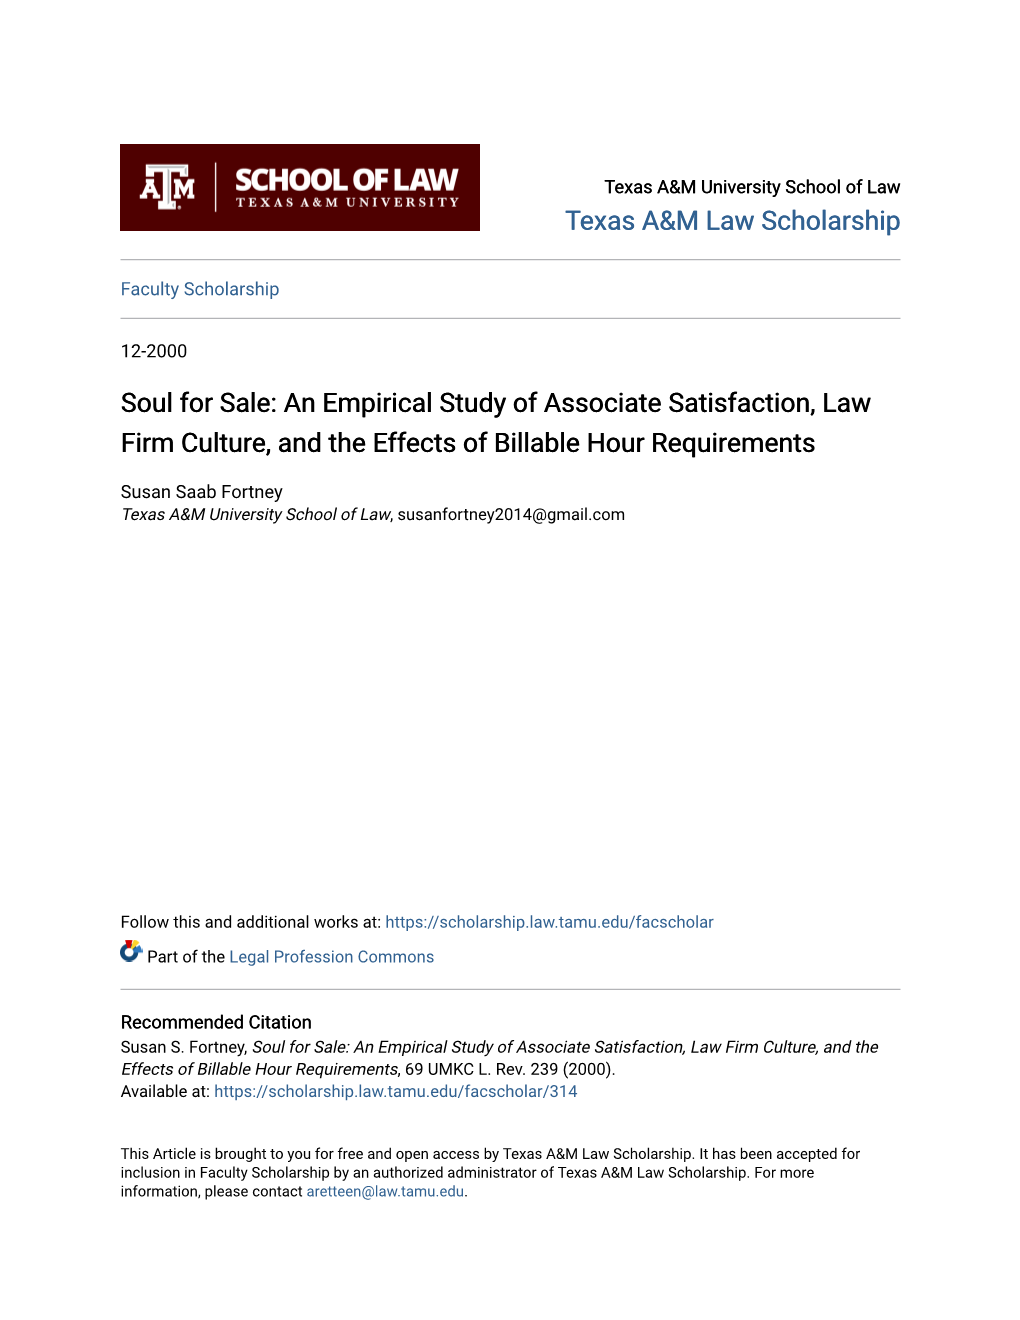 Soul for Sale: an Empirical Study of Associate Satisfaction, Law Firm Culture, and the Effects of Billable Hour Requirements